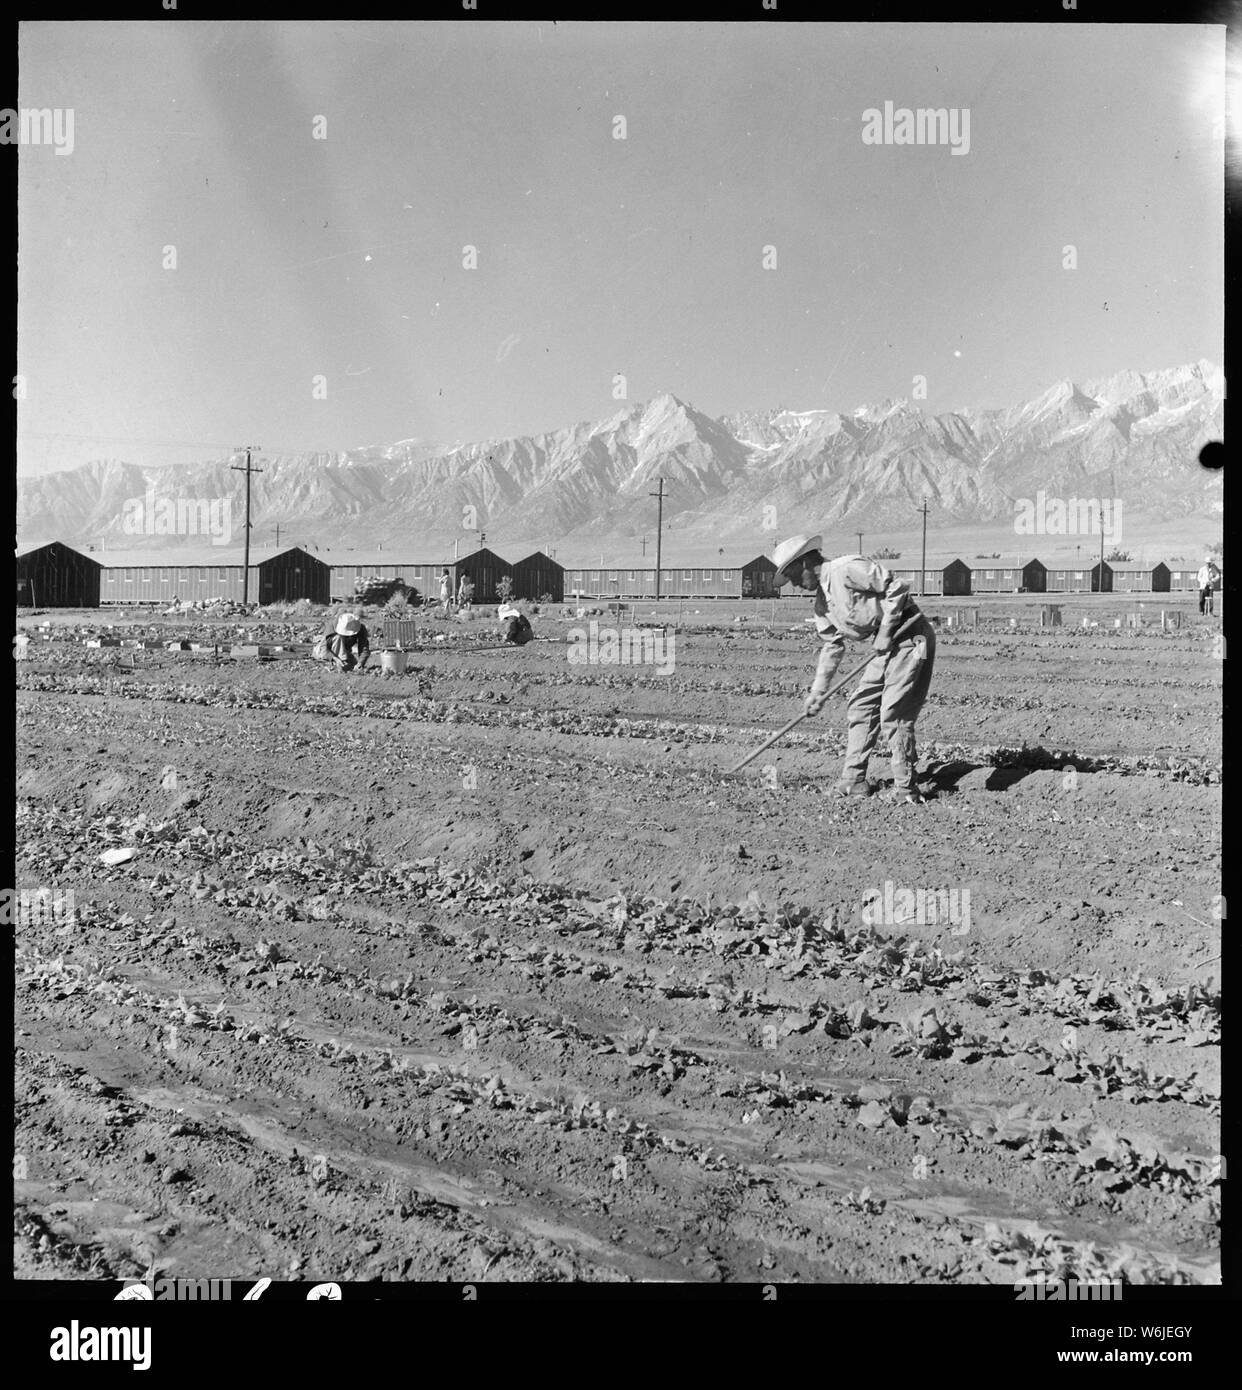 Manzanar Relocation Center, Manzanar, California. Evacuees of Japanese ancestry are growing flouris . . .; Scope and content:  The full caption for this photograph reads: Manzanar Relocation Center, Manzanar, California. Evacuees of Japanese ancestry are growing flourishing truck crops for their own use in their hobby gardens. These crops are grown in plots 10 x 50 feet between blocks of barrack at this War Relocation Authority center. Stock Photo